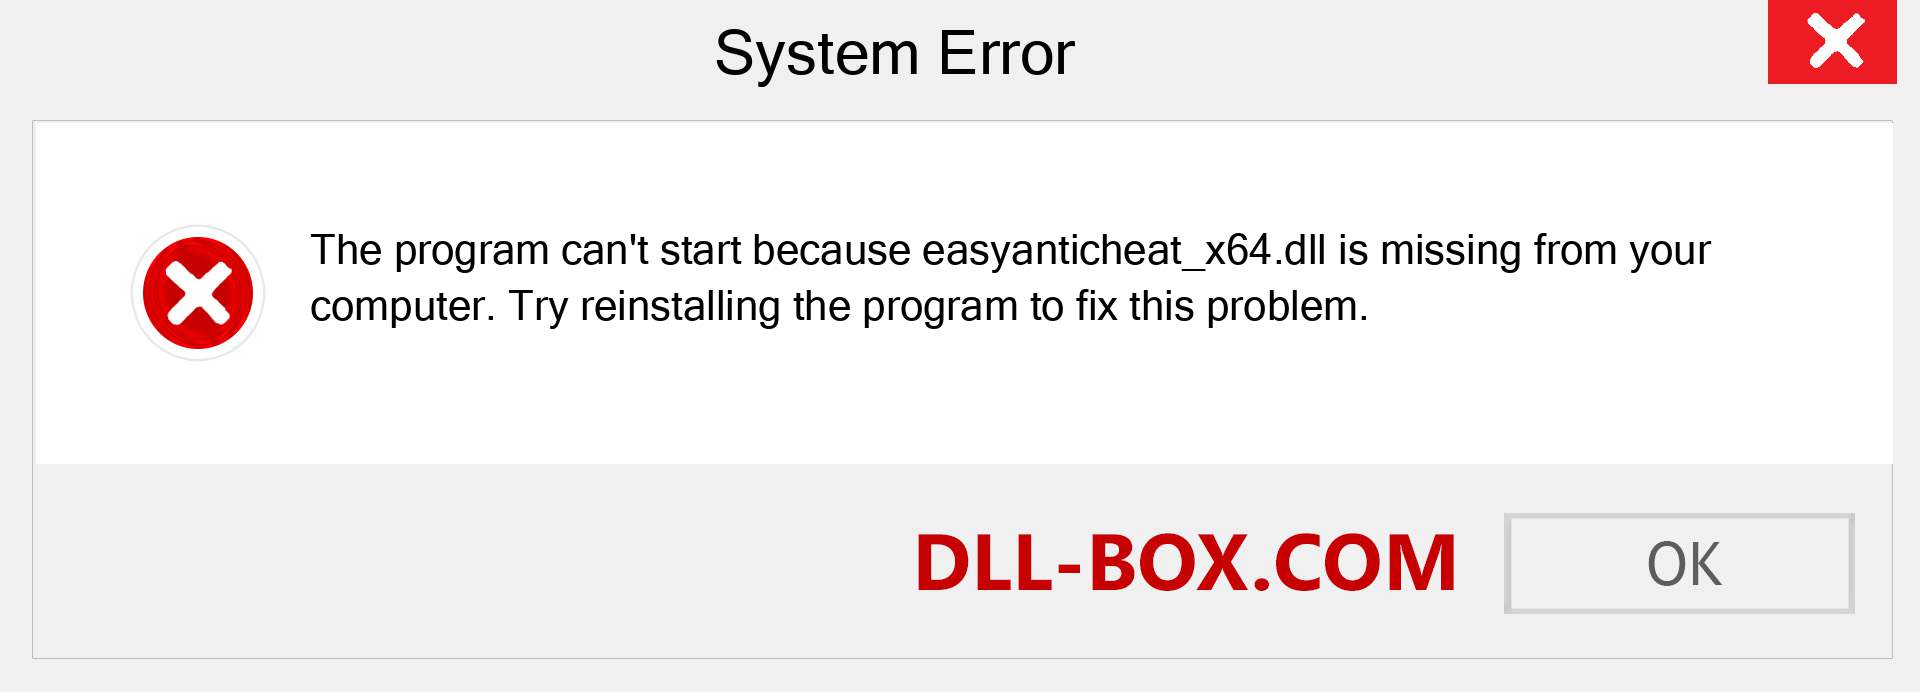  easyanticheat_x64.dll file is missing?. Download for Windows 7, 8, 10 - Fix  easyanticheat_x64 dll Missing Error on Windows, photos, images